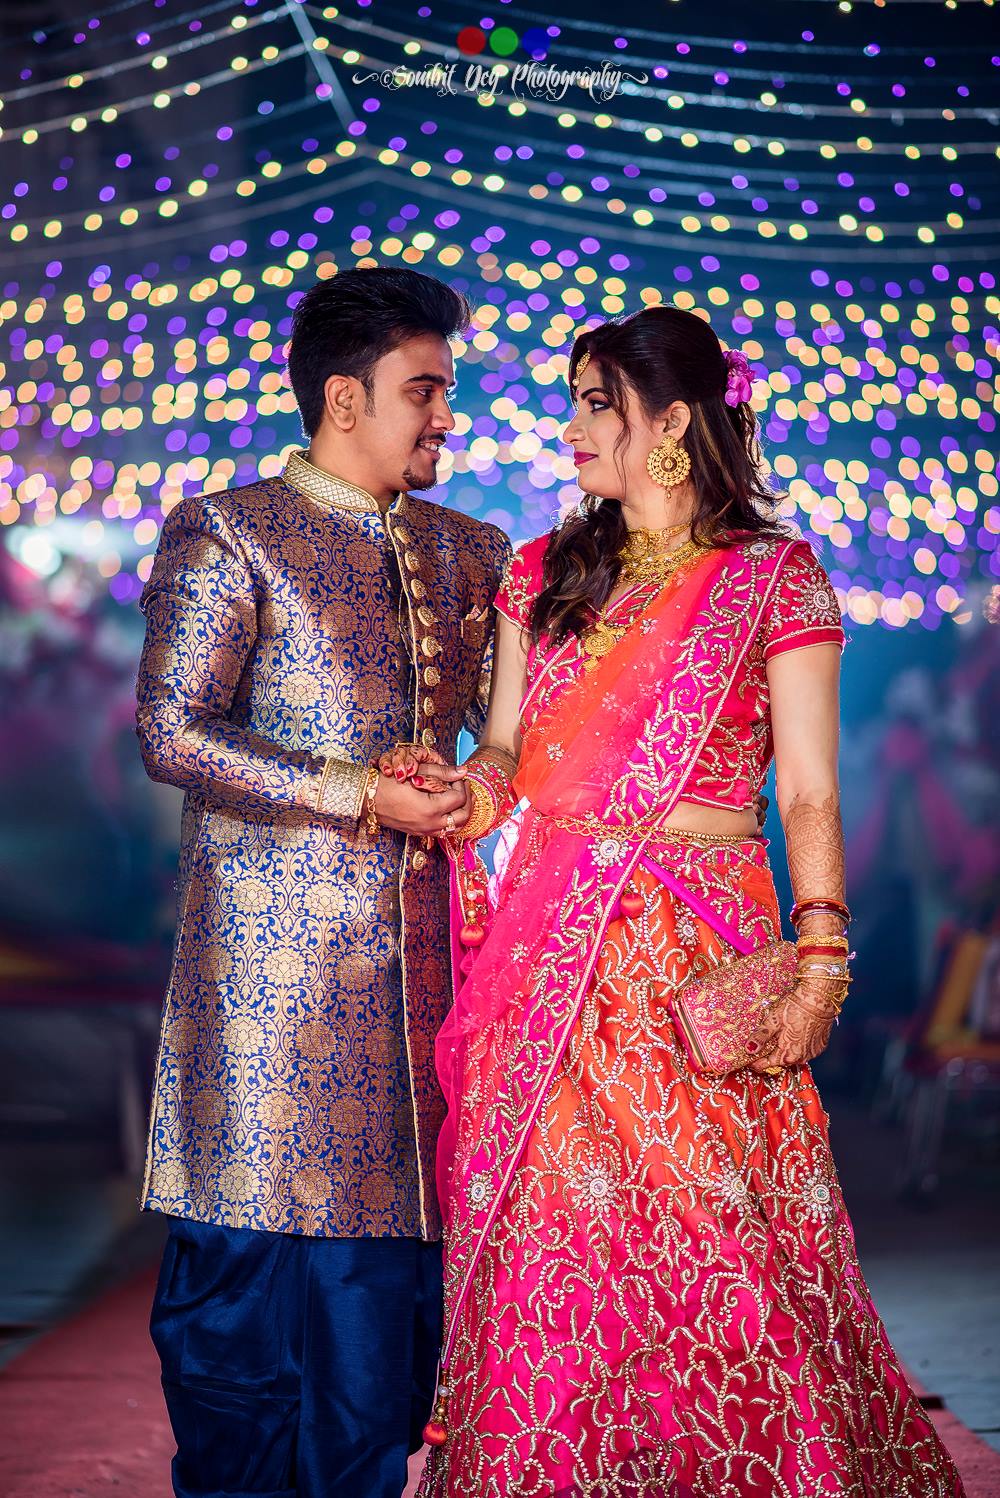 Stunning Bengali Brides That Are The New Trendsetter!